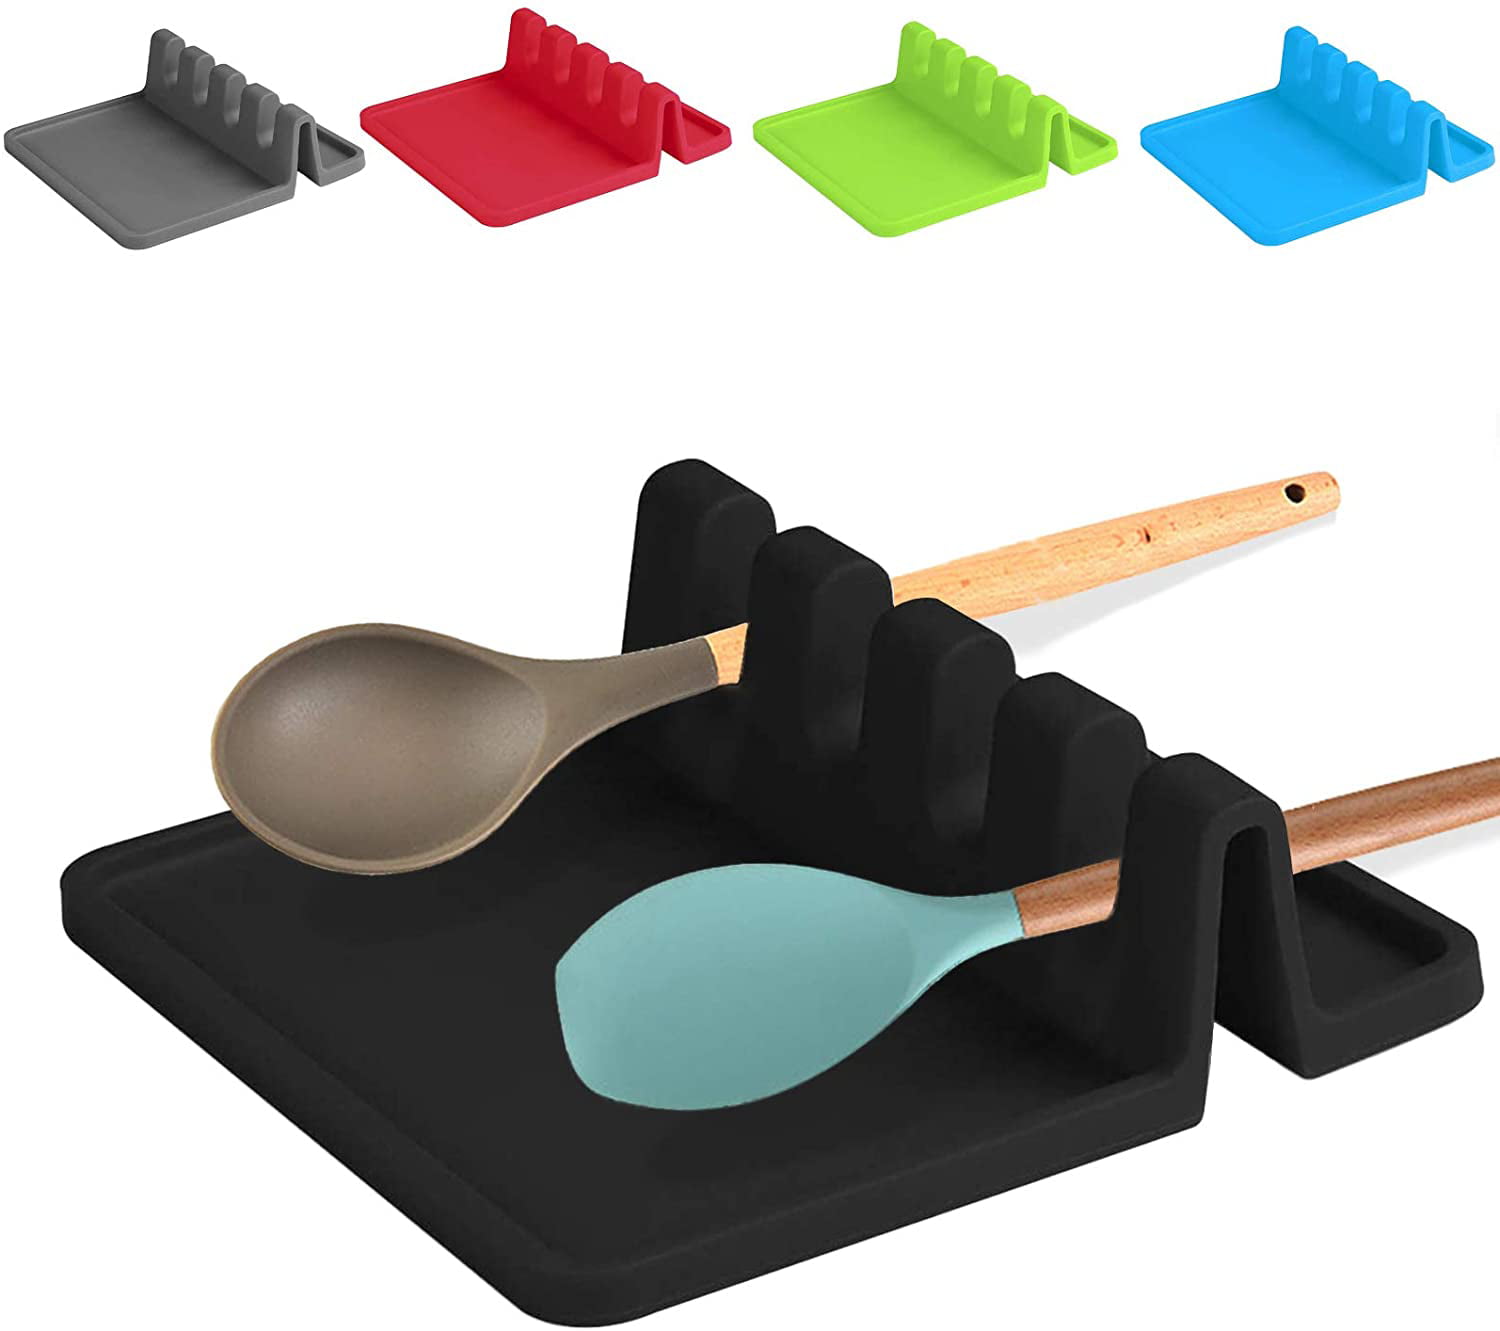 Heat-Resistant Silicone Spoon Rest for Kitchen Counter Larger Size Utensil Rest with Drip Pad BPA-Free Kitchen Utensil Rest for Countertop Spoon Holder for Stove Top